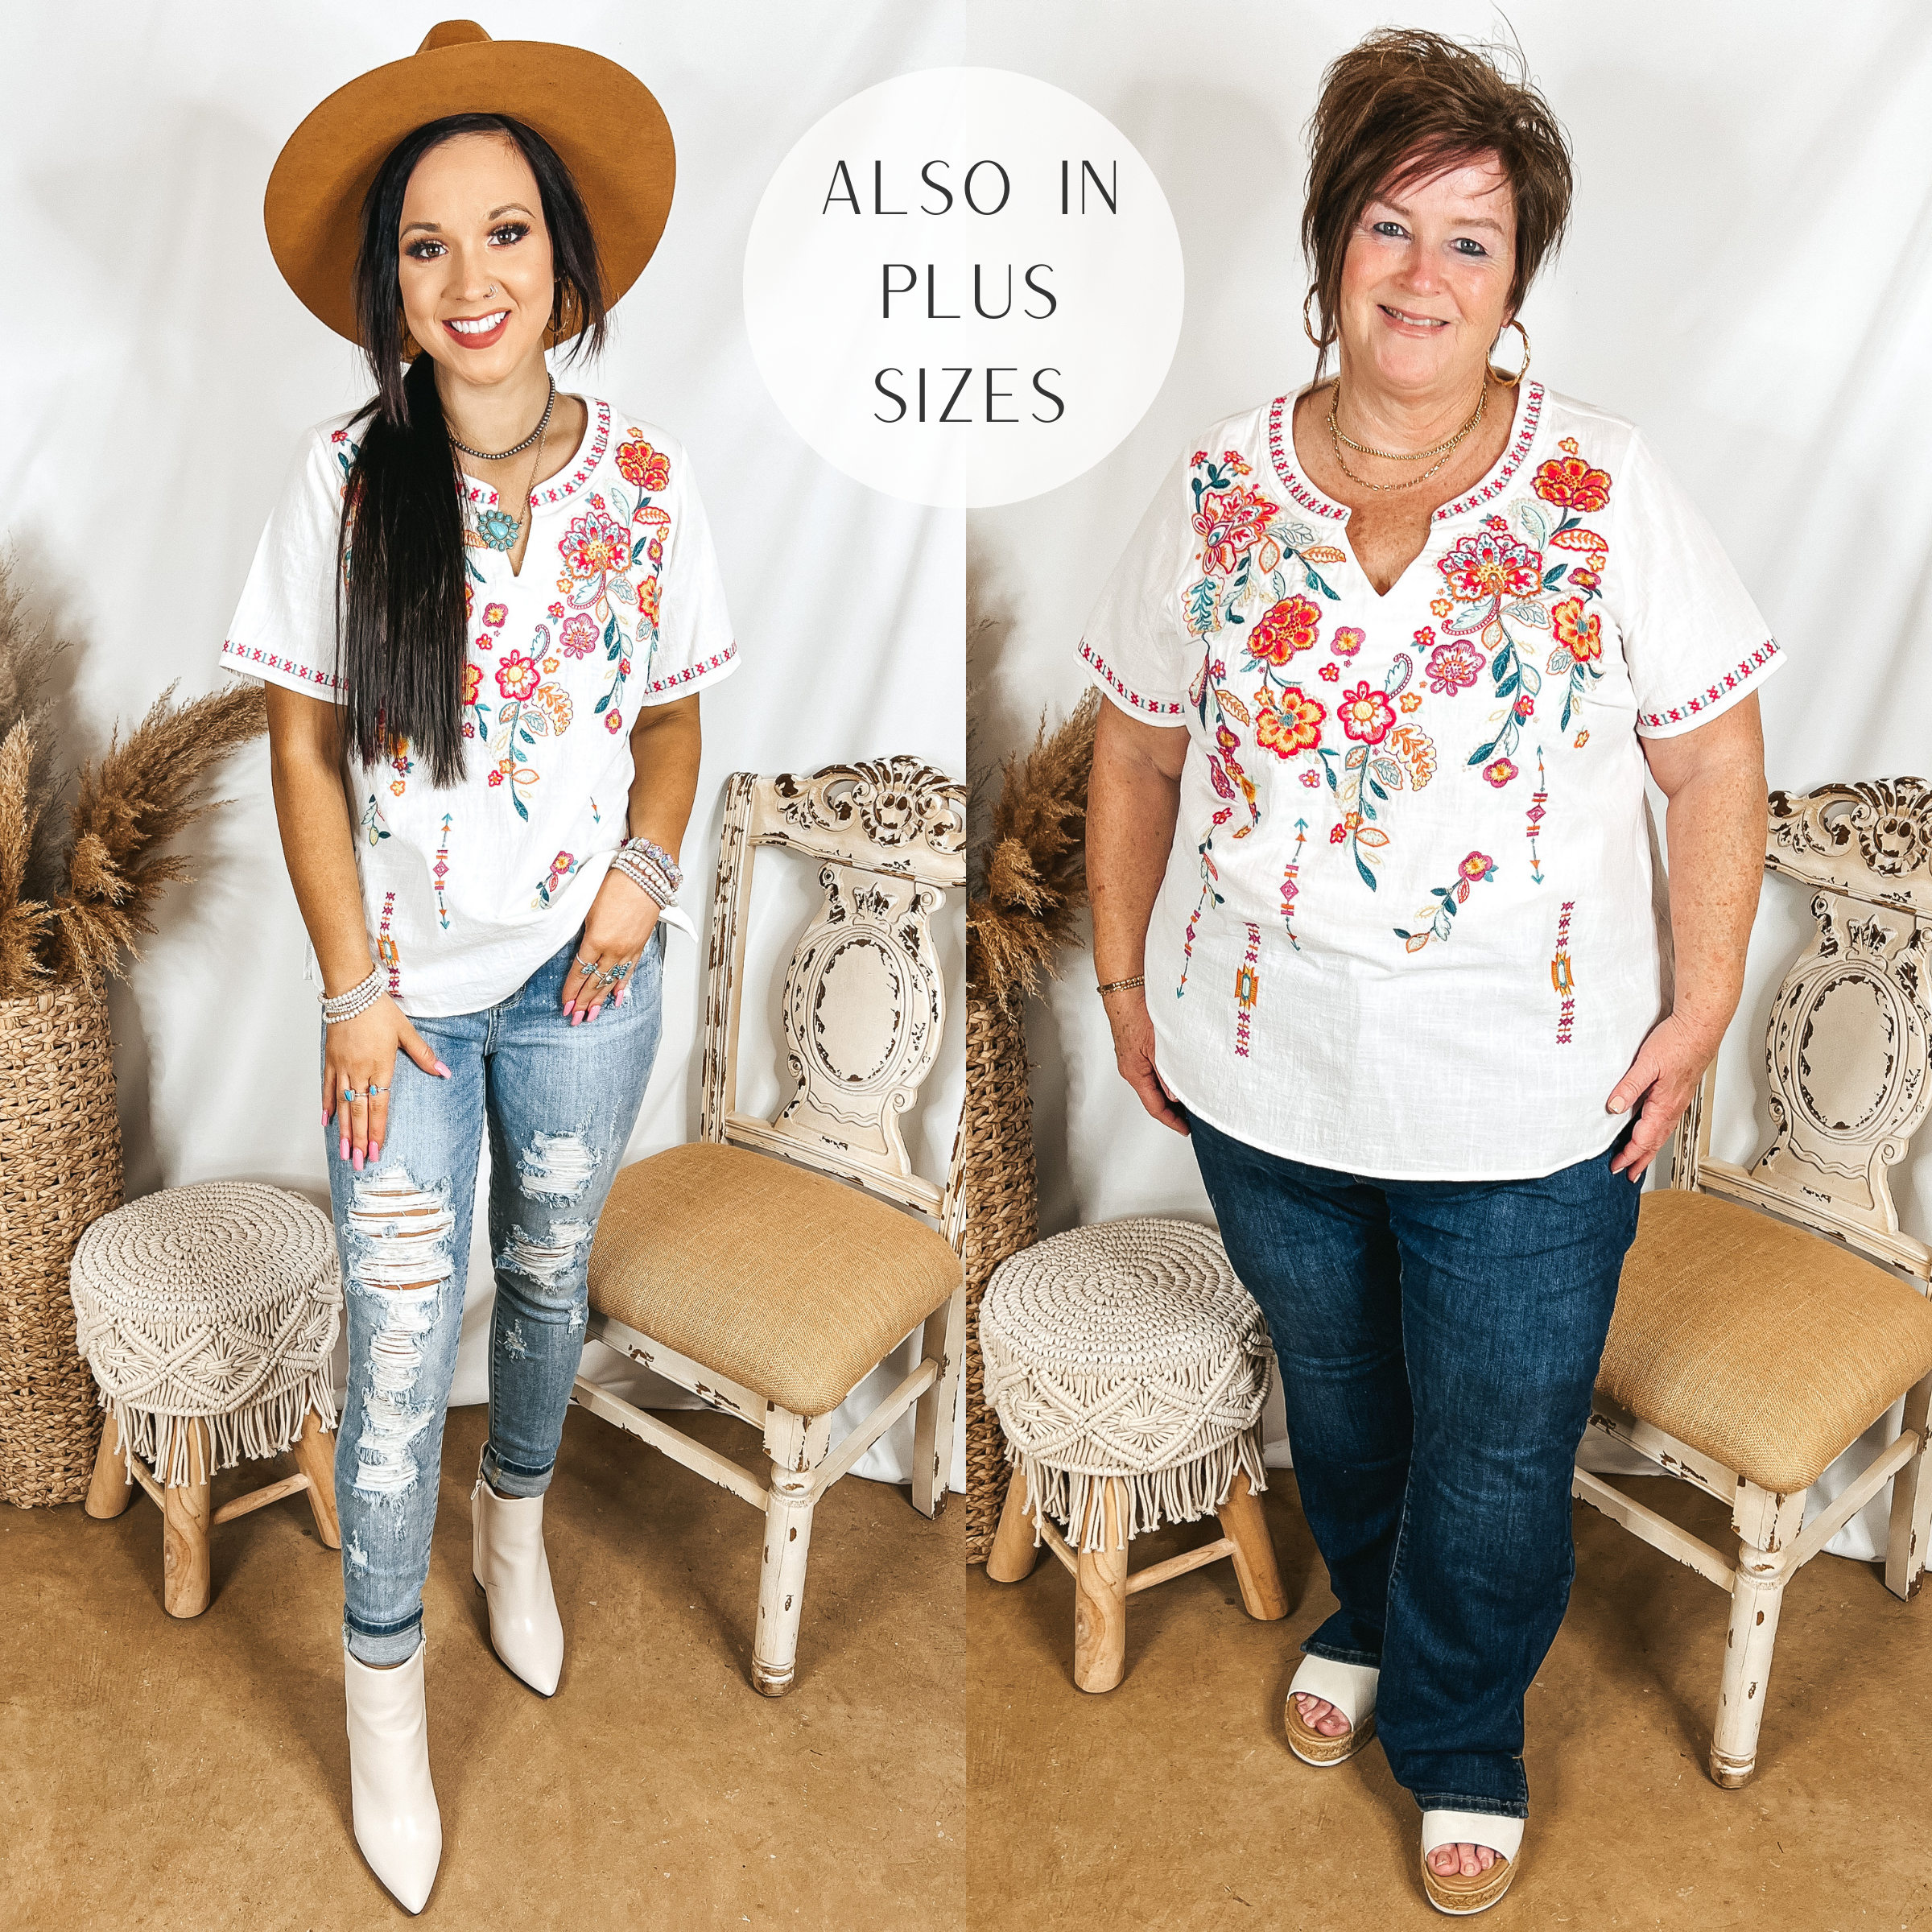 Models are wearing a white floral embroidered top. The top has a notched v neck. Size small model has it paired with distressed skinny jeans, white booties, and a camel brown hat. Plus size model has it paired with dark wash bootcut jeans, white sandals, and gold jewelry.